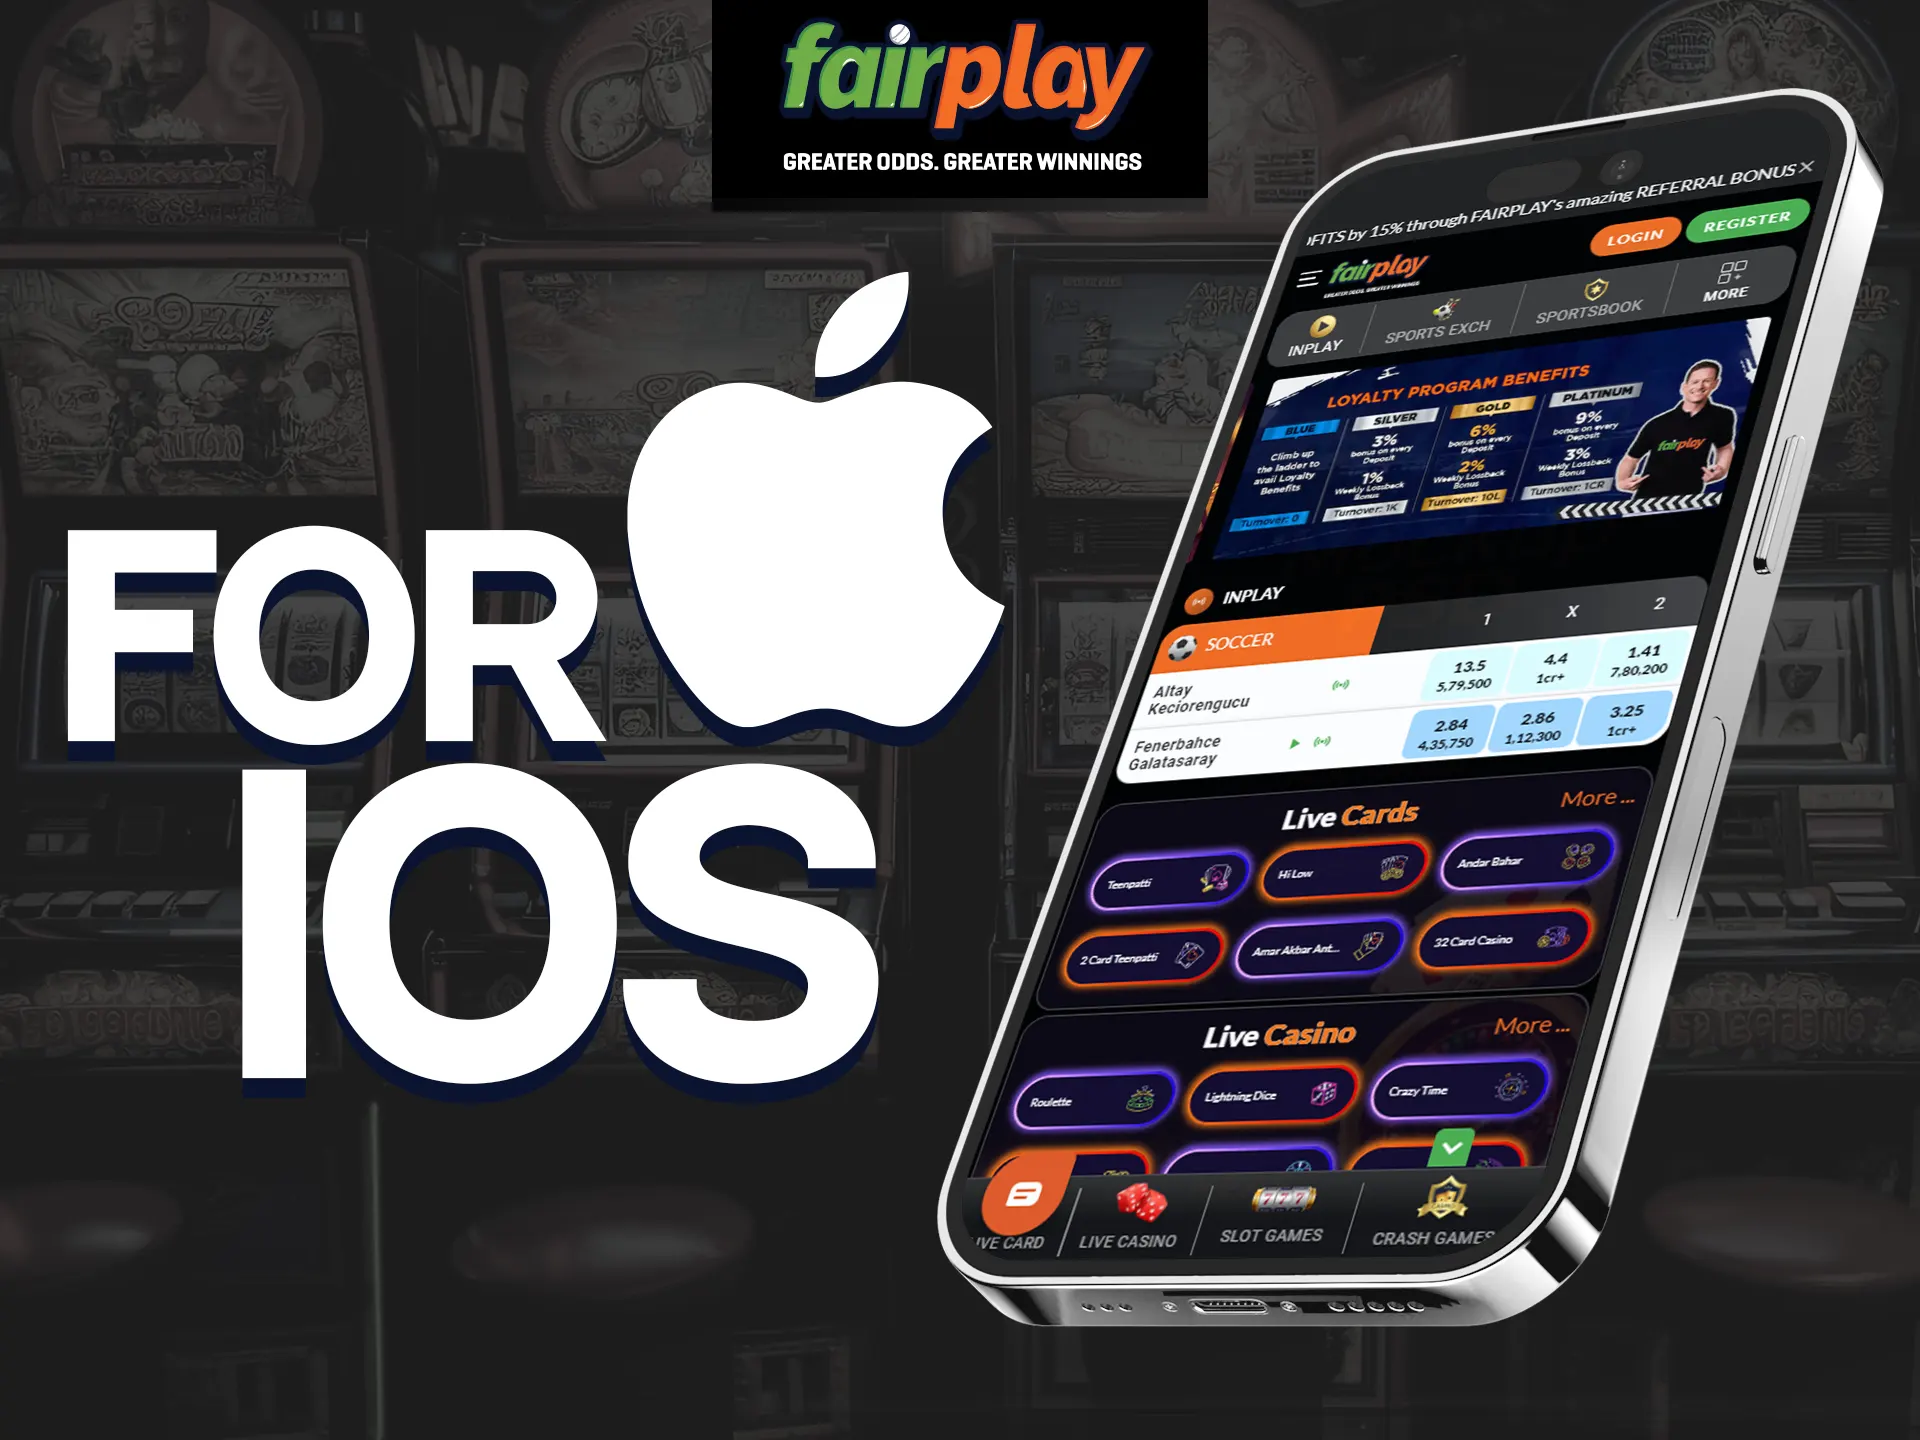 Fairplay casino is available on iOS mobile devices.